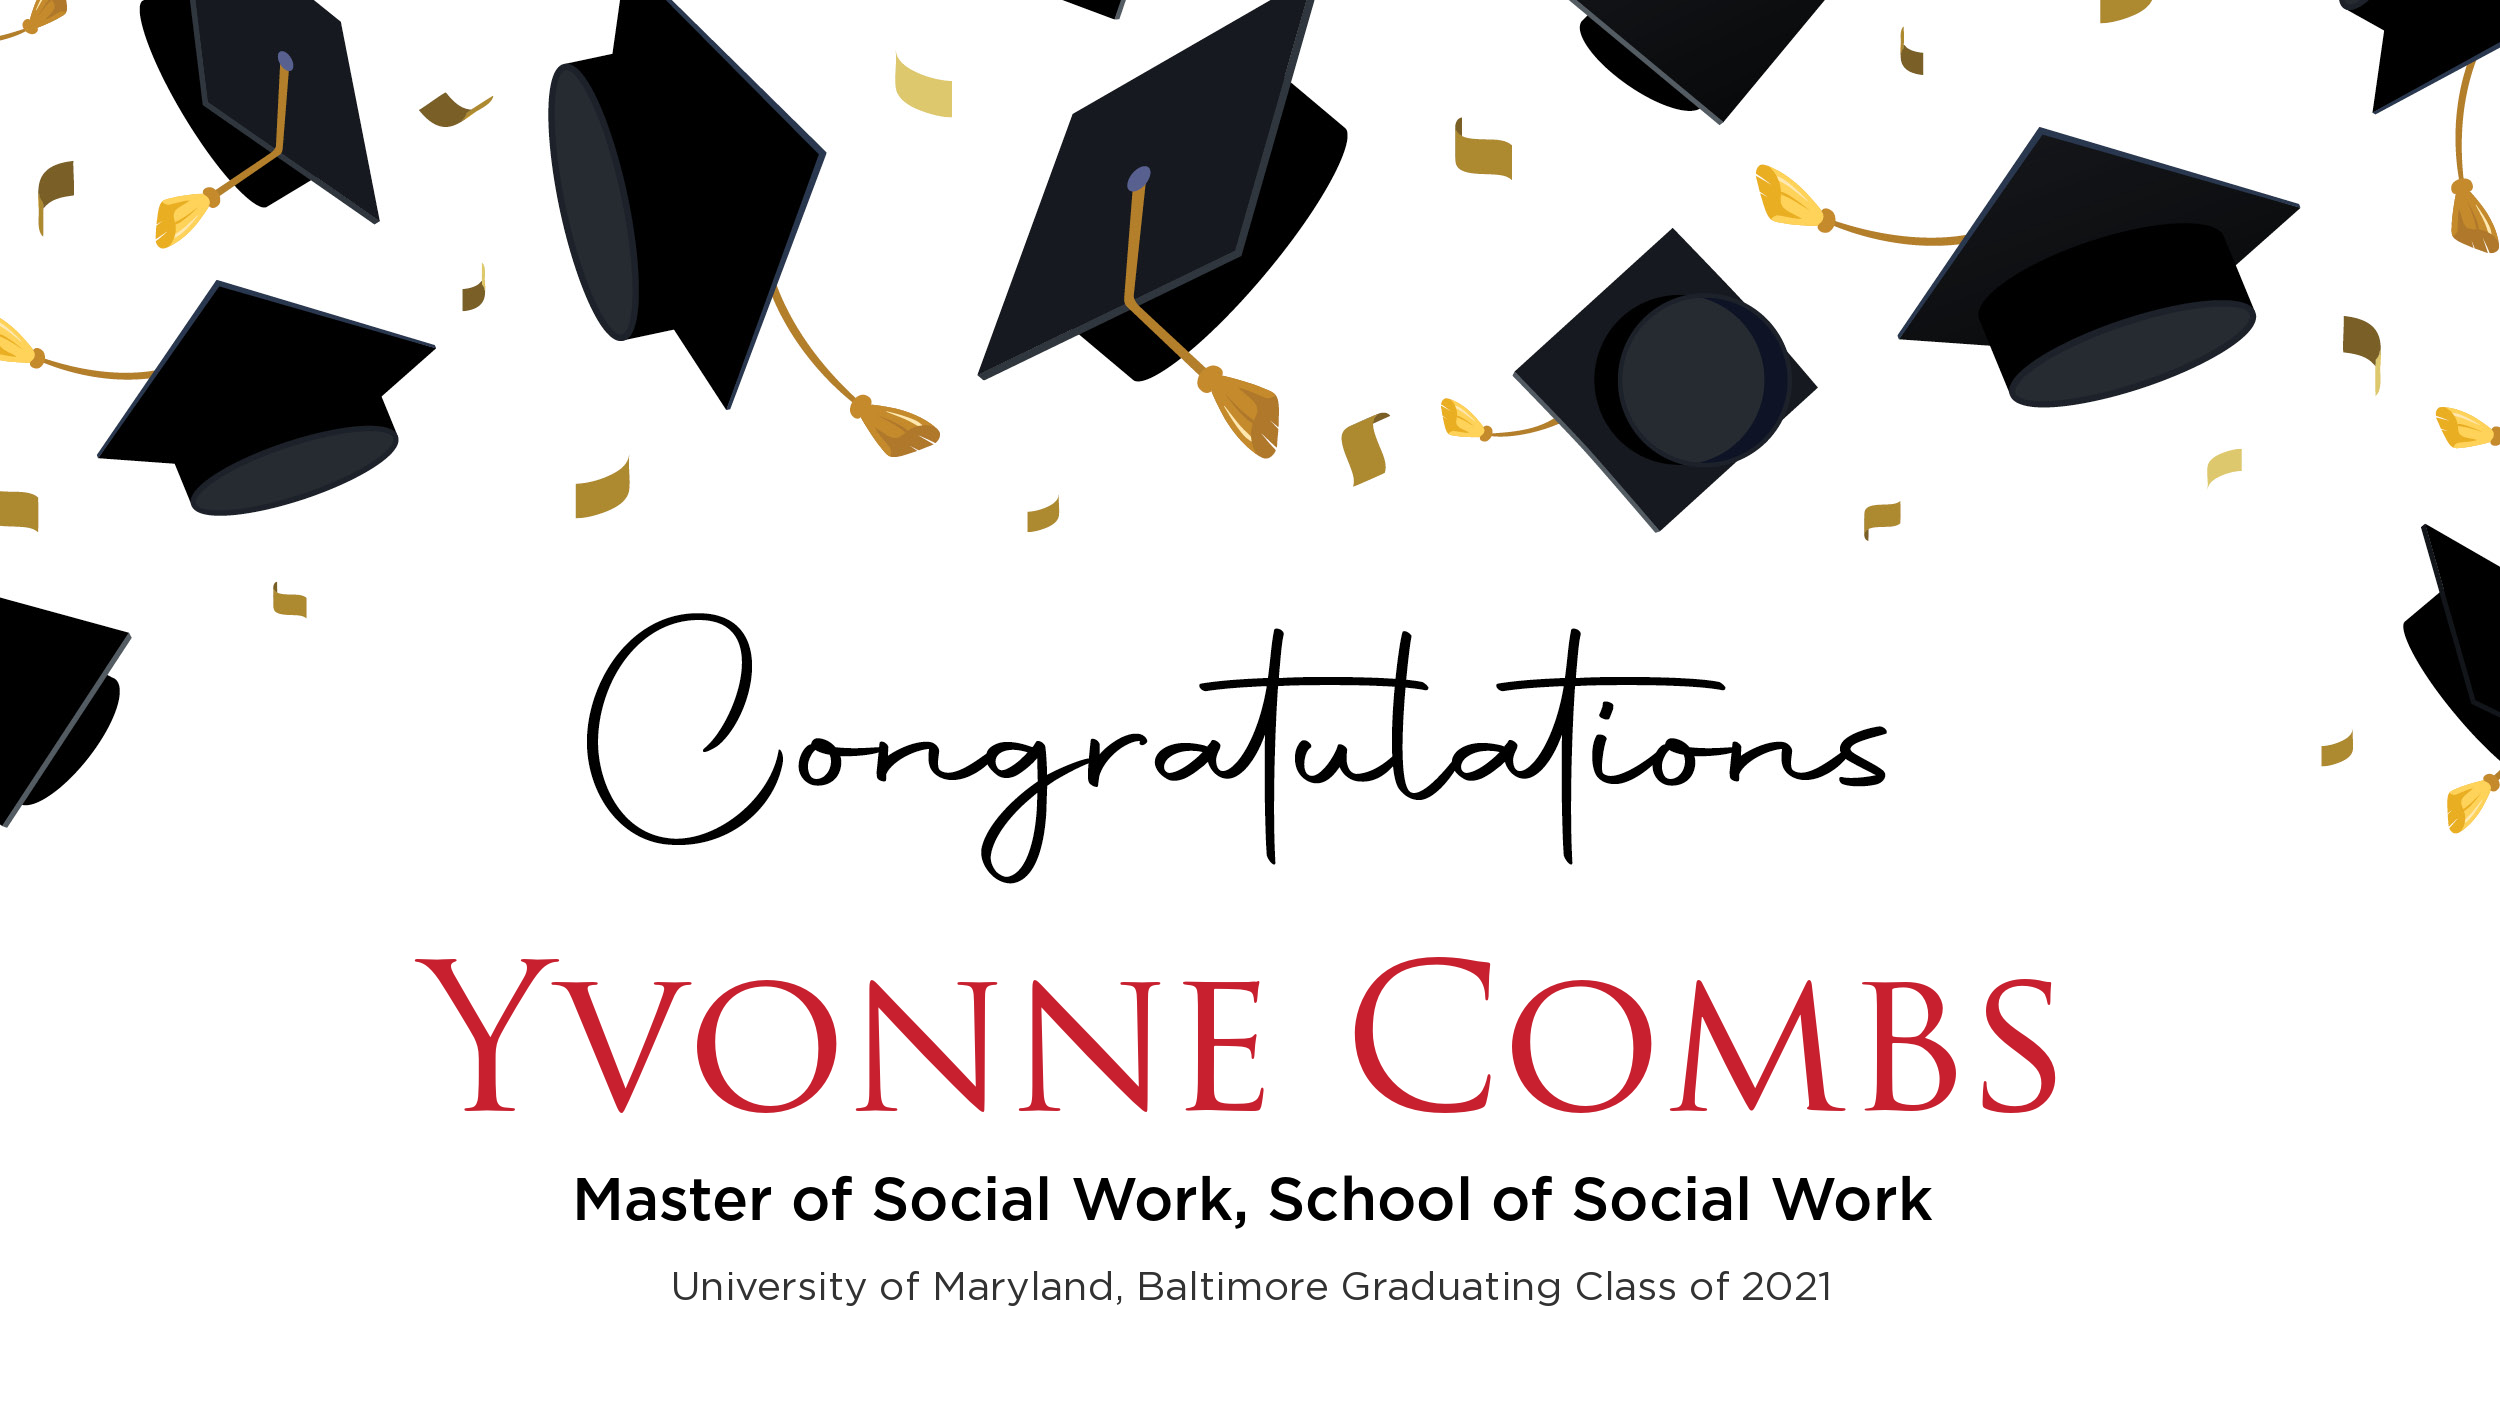 Congratulations Yvonne Combs, Master of Social Work